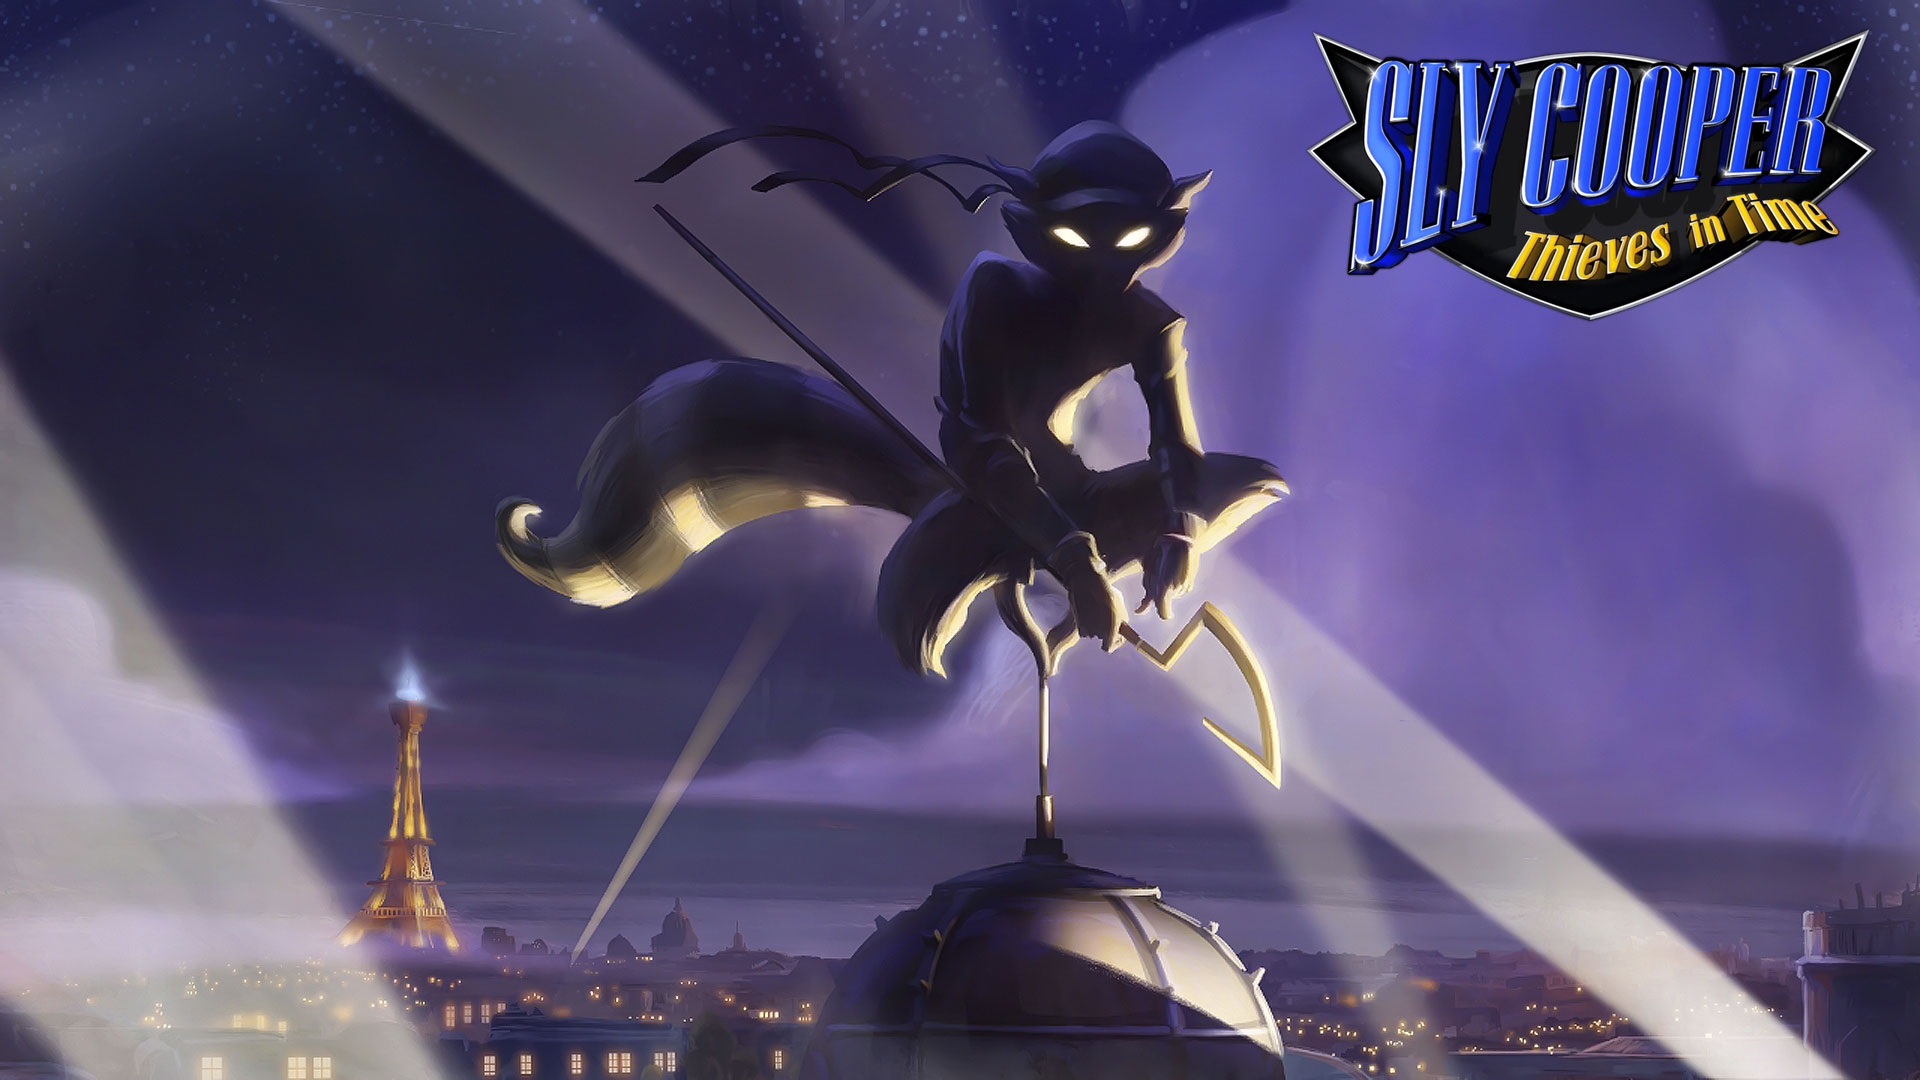 Sly Cooper Thieves in Time Fond d'écran HD ArrièrePlan